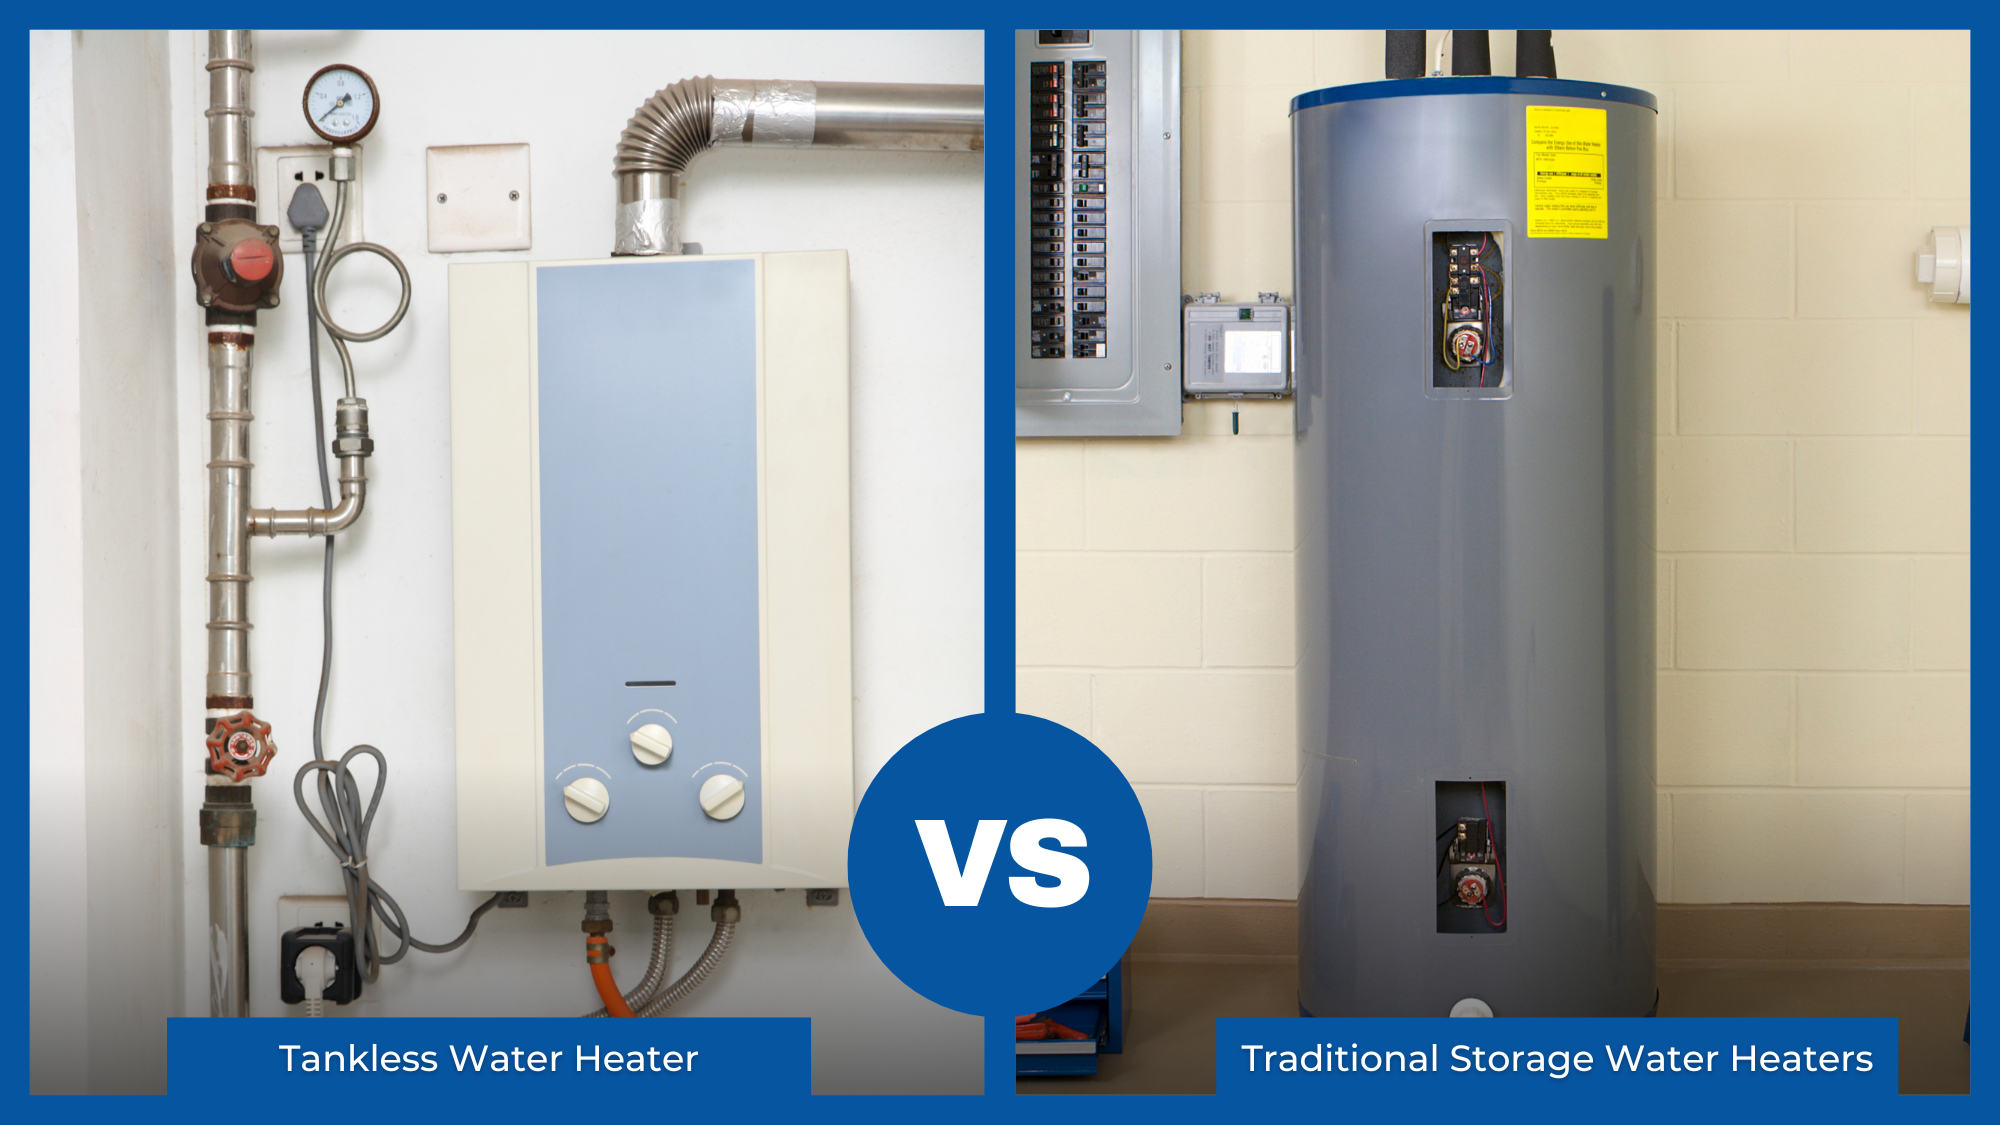 Top 5 Reasons To Convert To A Tankless Water Heater